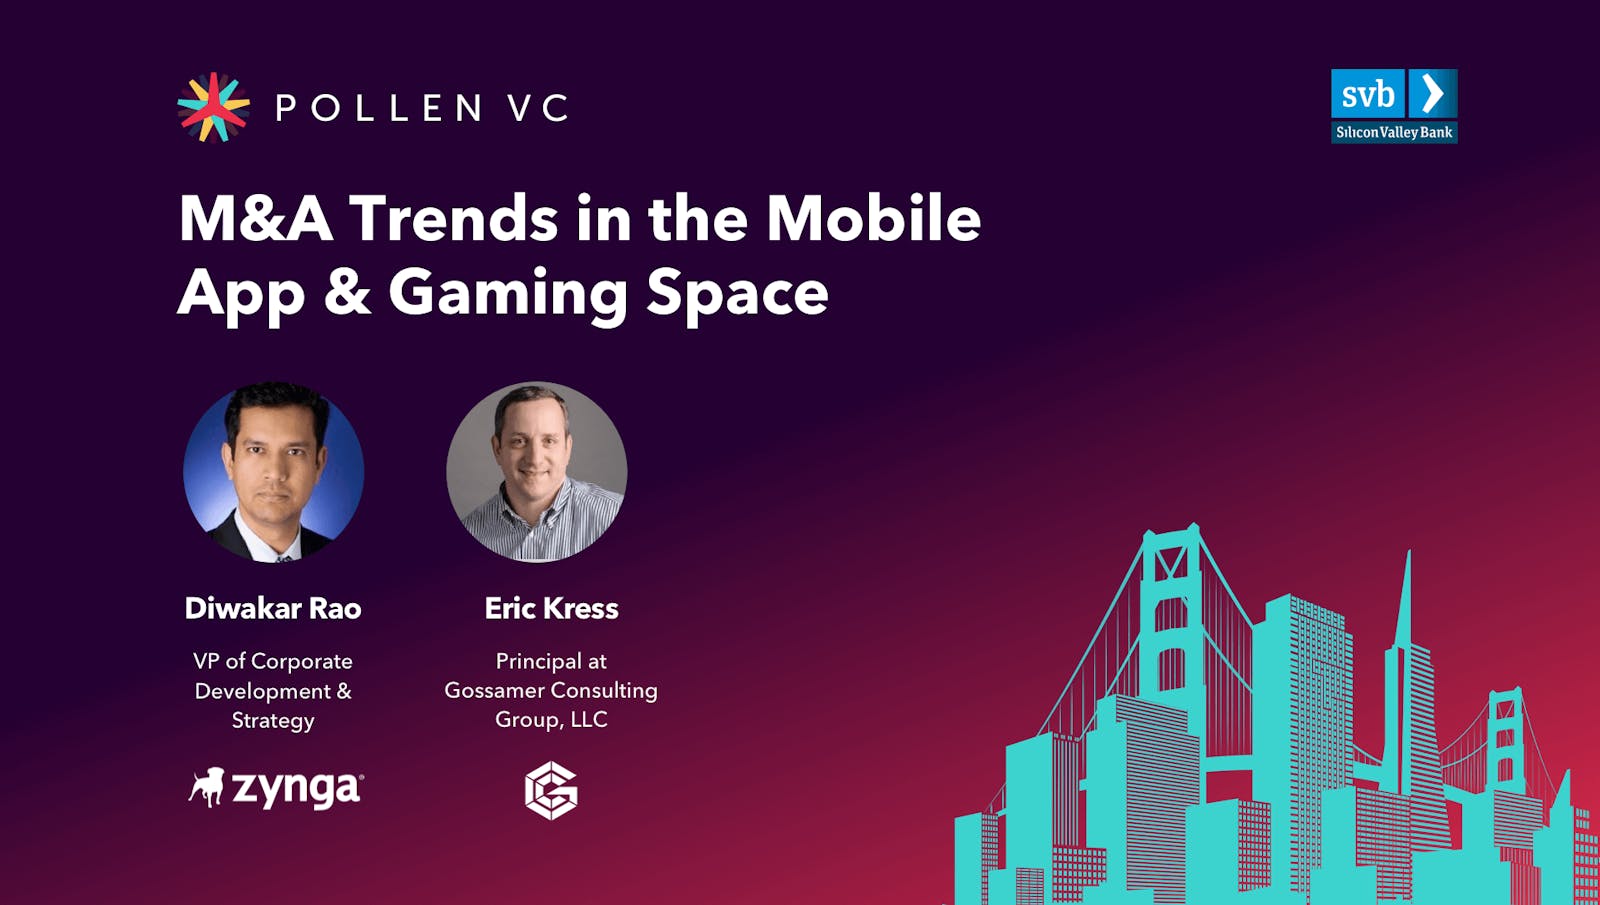 M&A Trends in the mobile app & gaming space